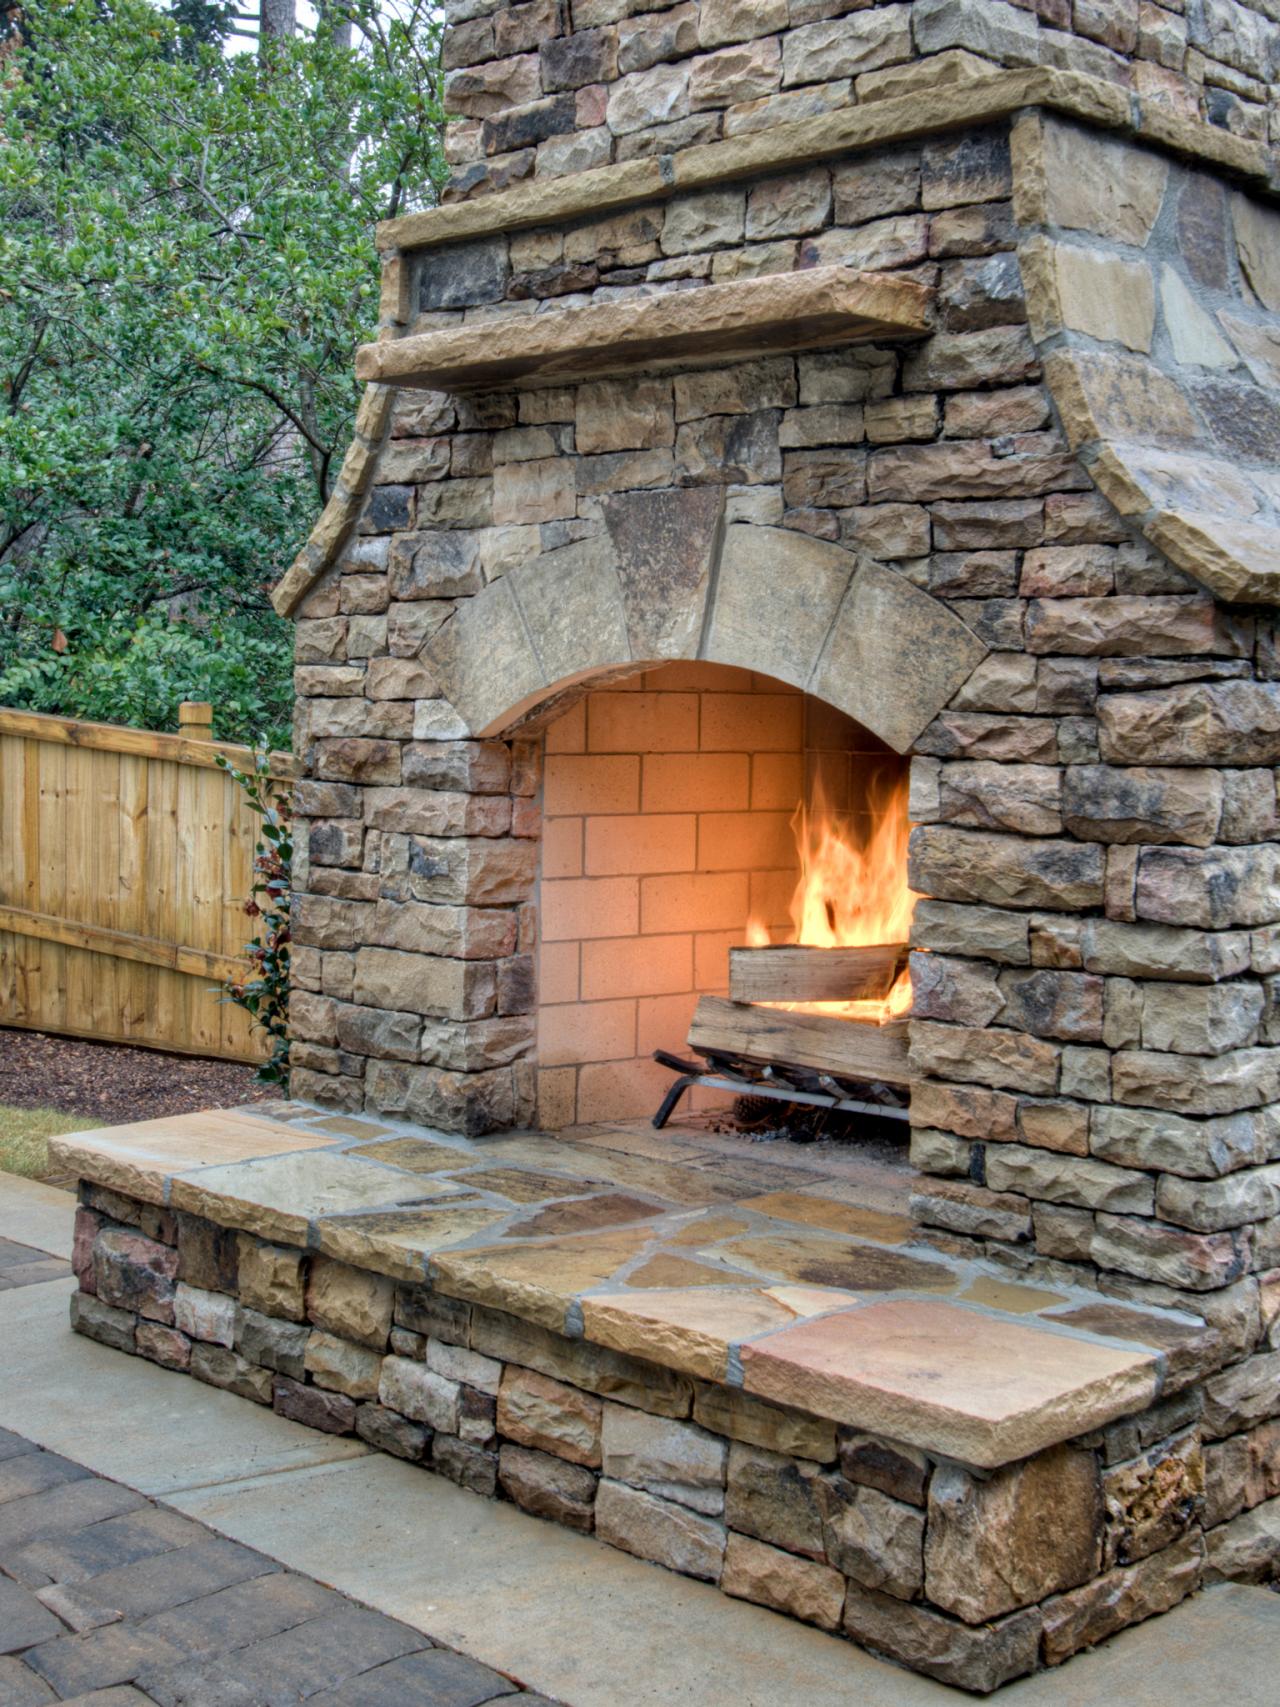 How To Build An Outdoor Fireplace, Outdoor Fireplace Against Wall